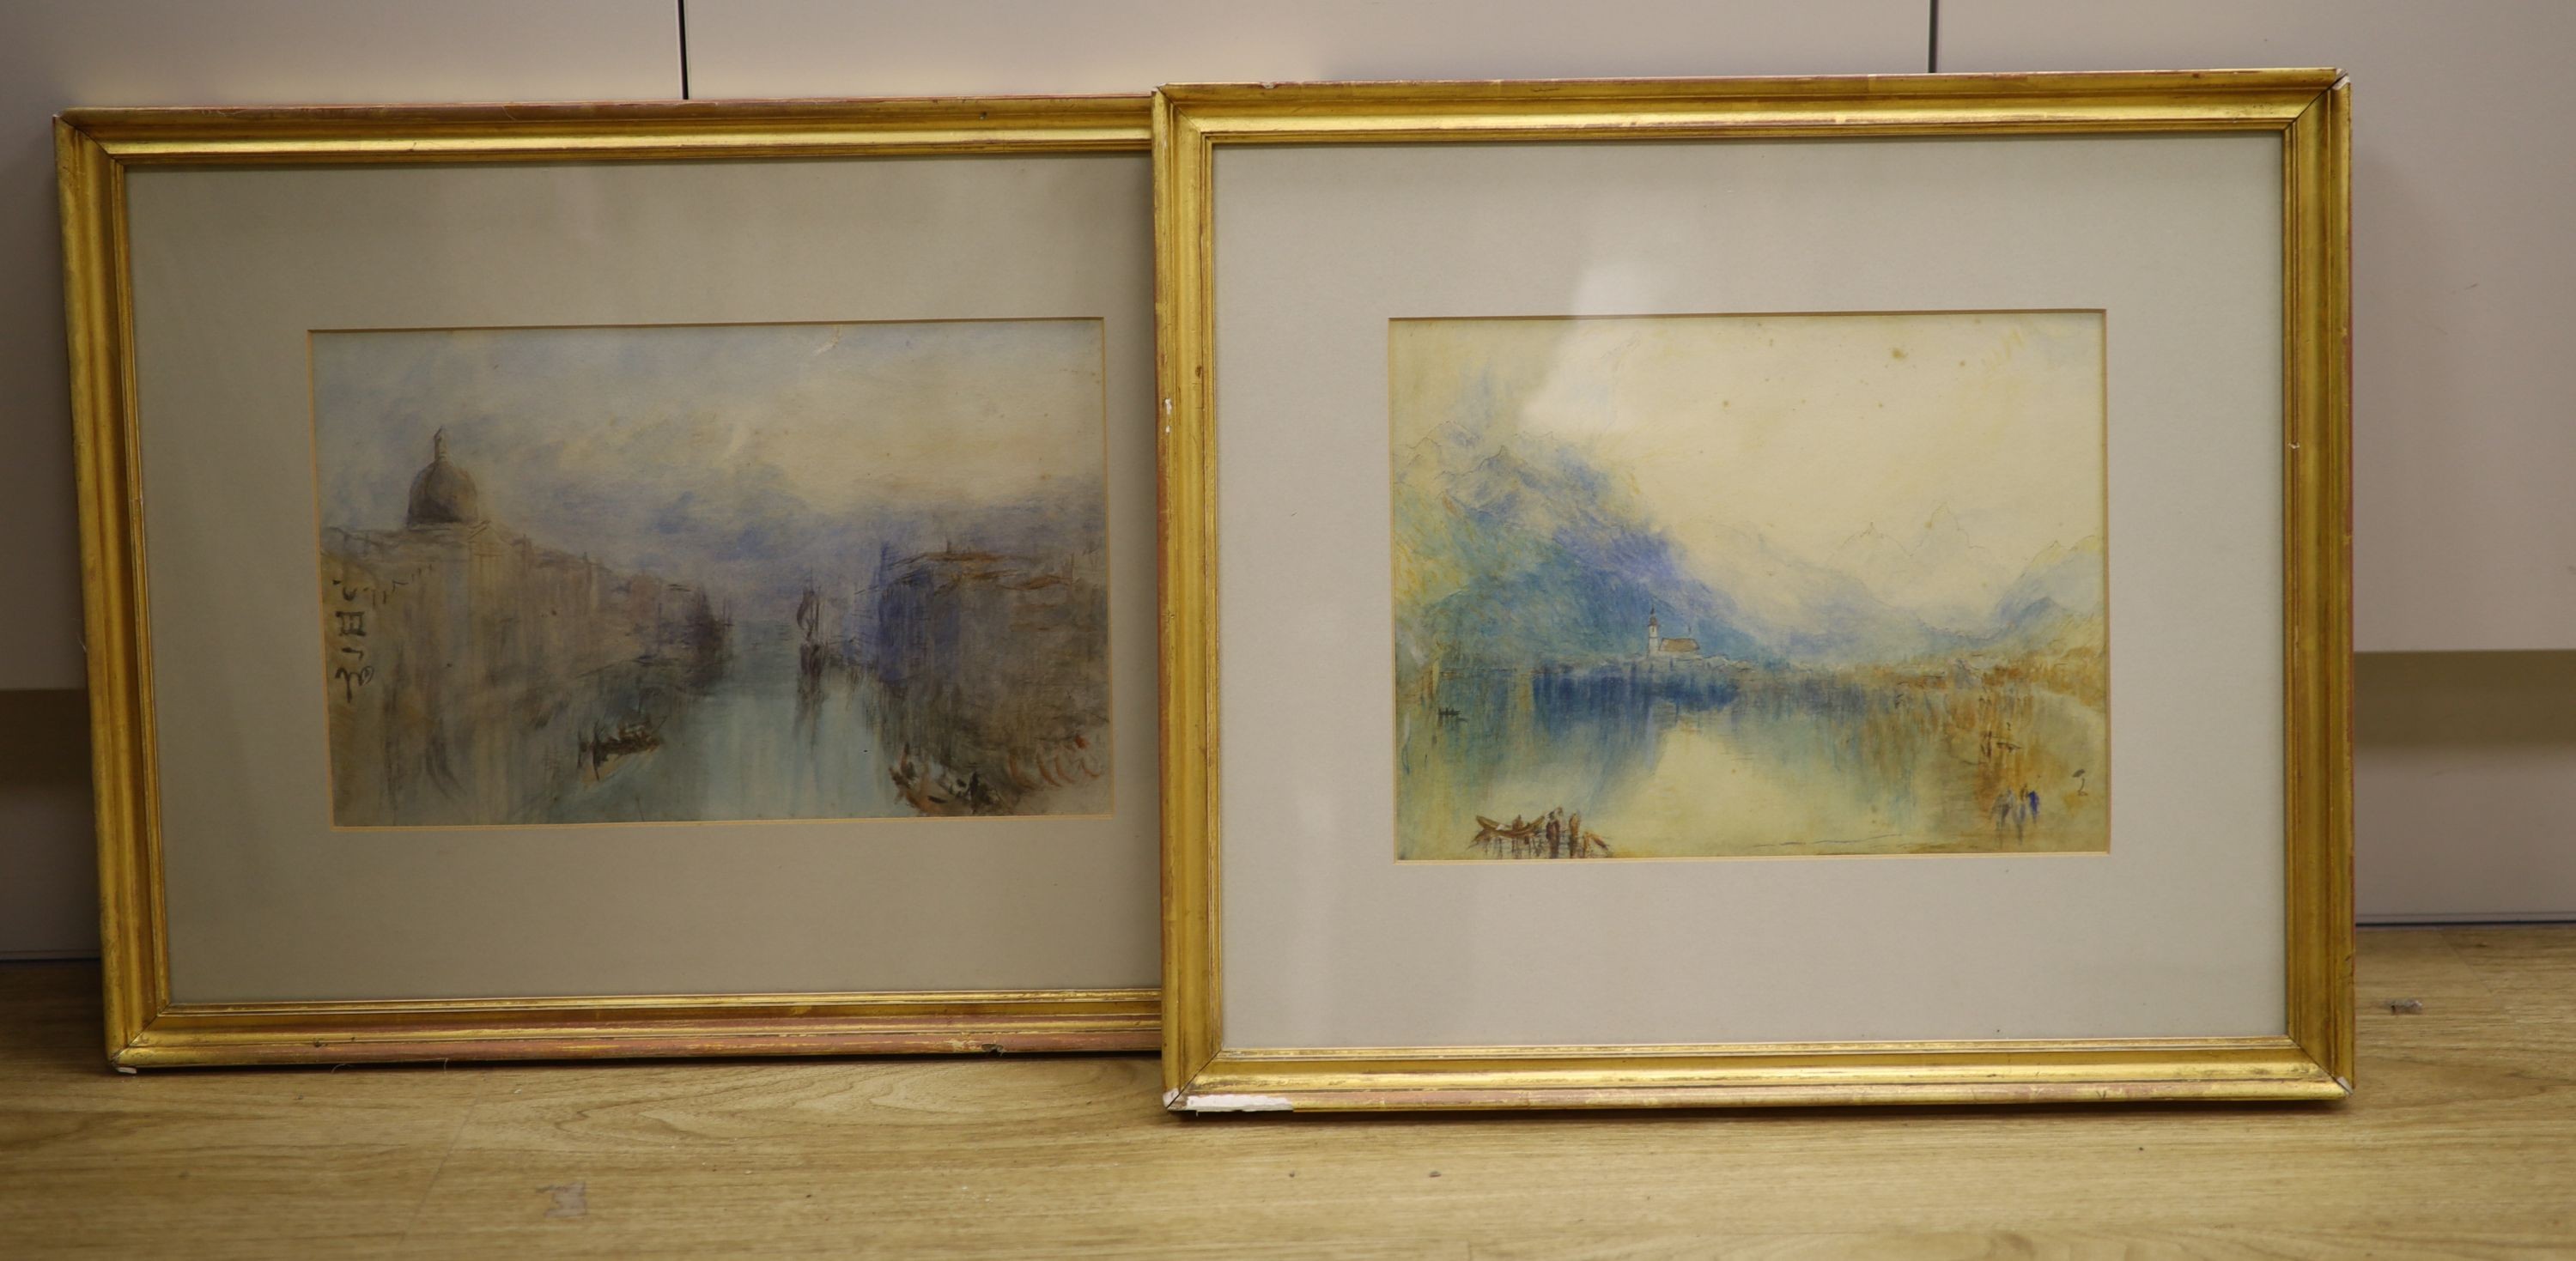 Manner of Brabazon Brabazon, two watercolours, Lake scene and View of Venice, 21 x 28cm and 20 x 32cm